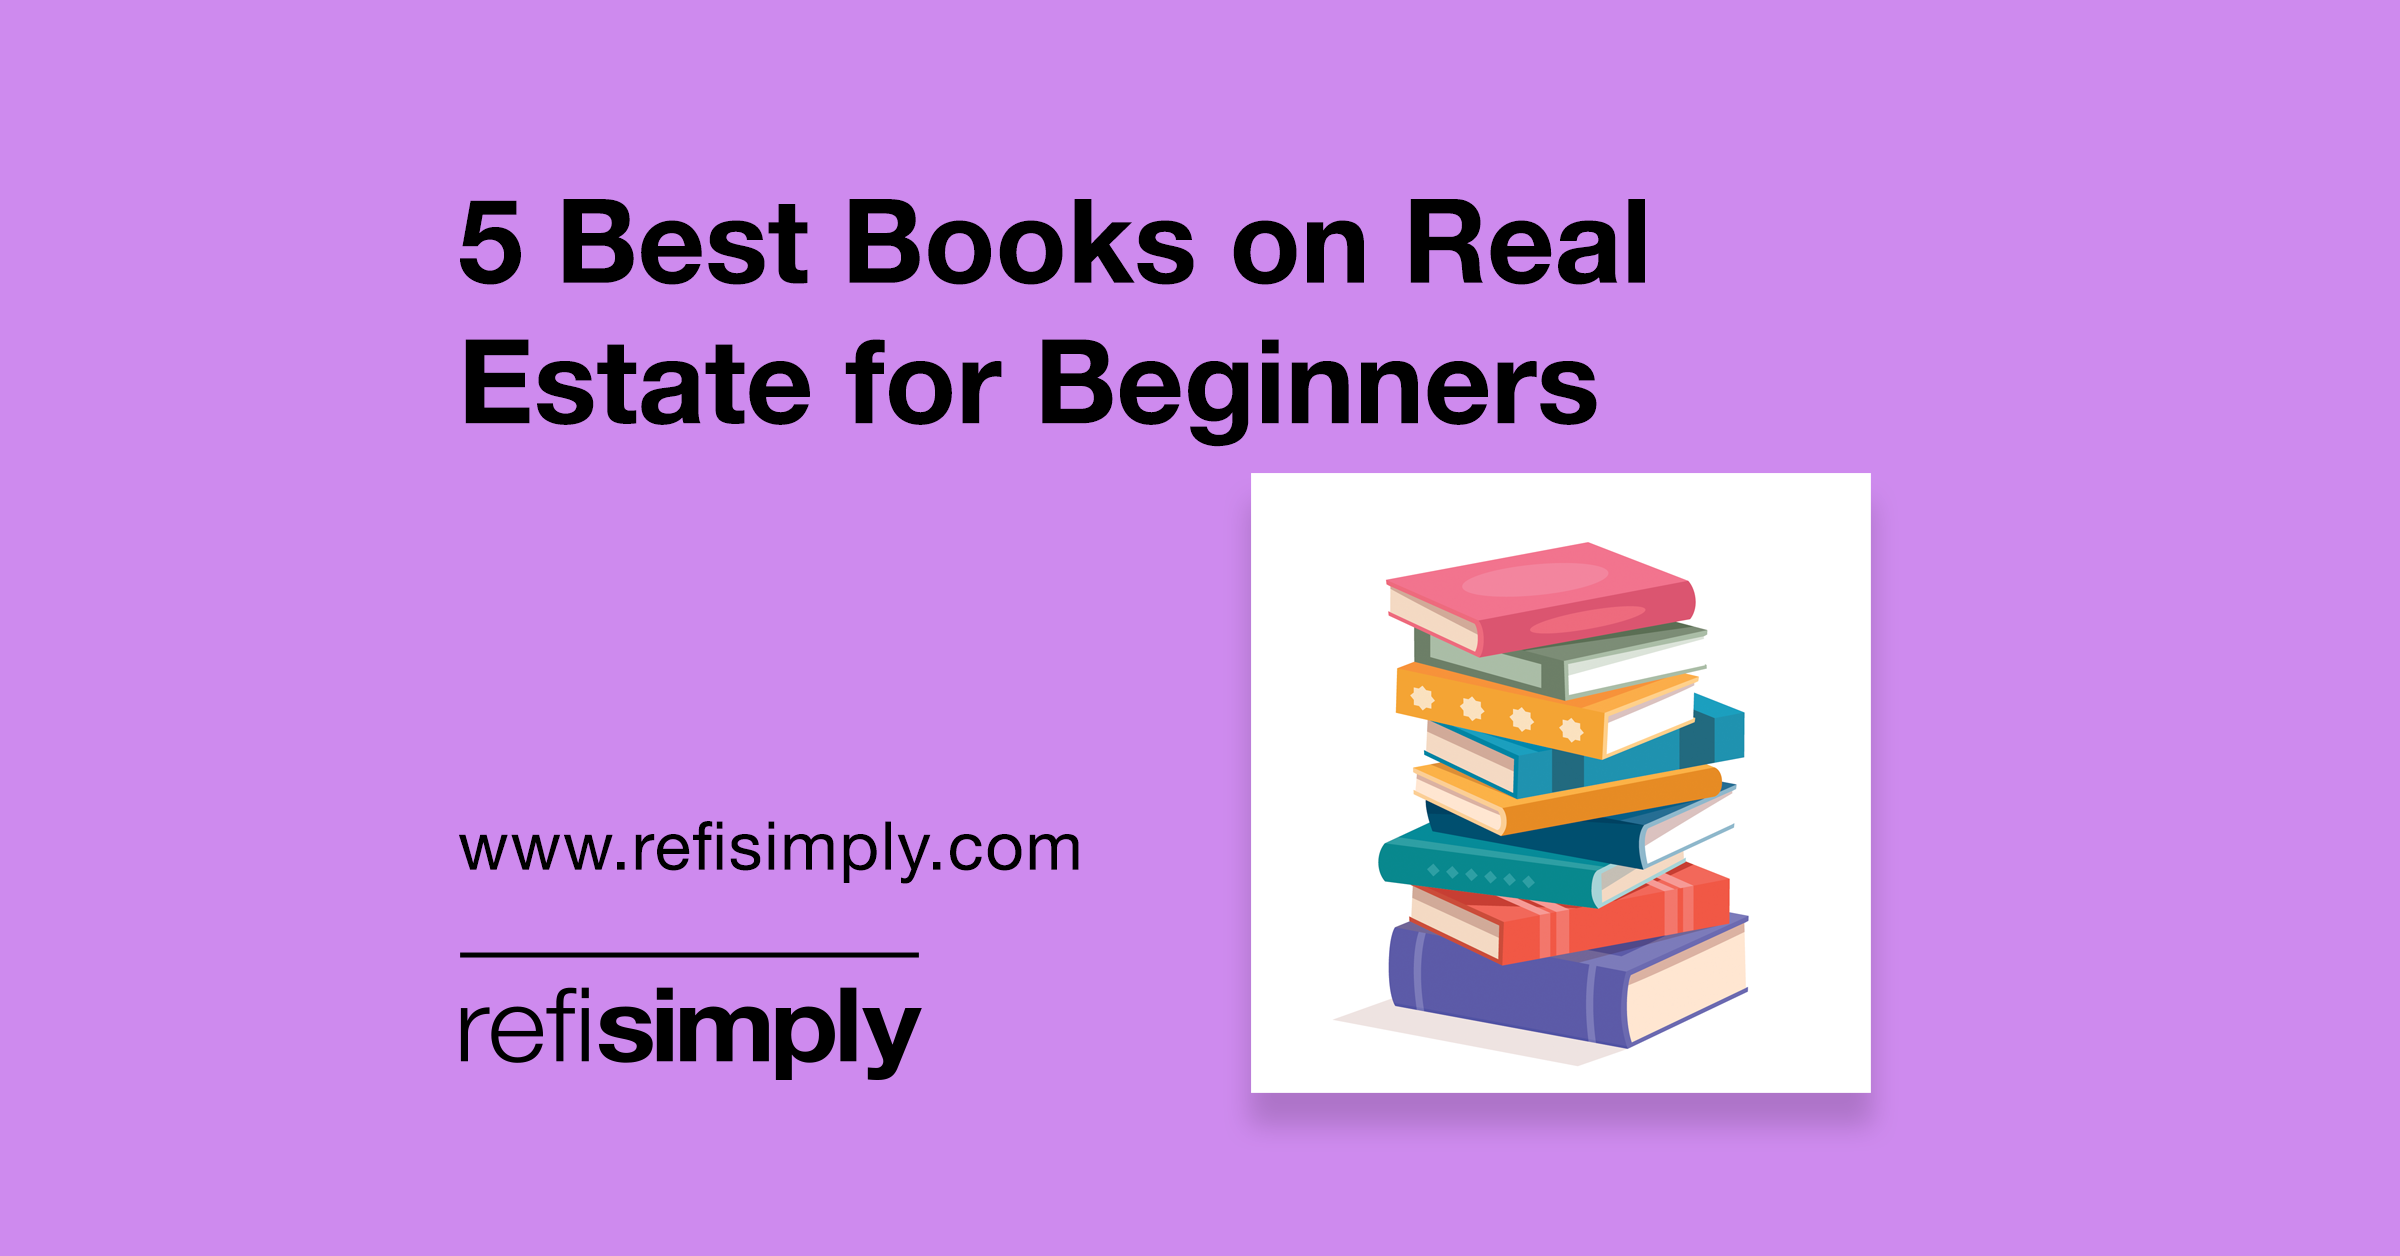 books on real estate for beginners